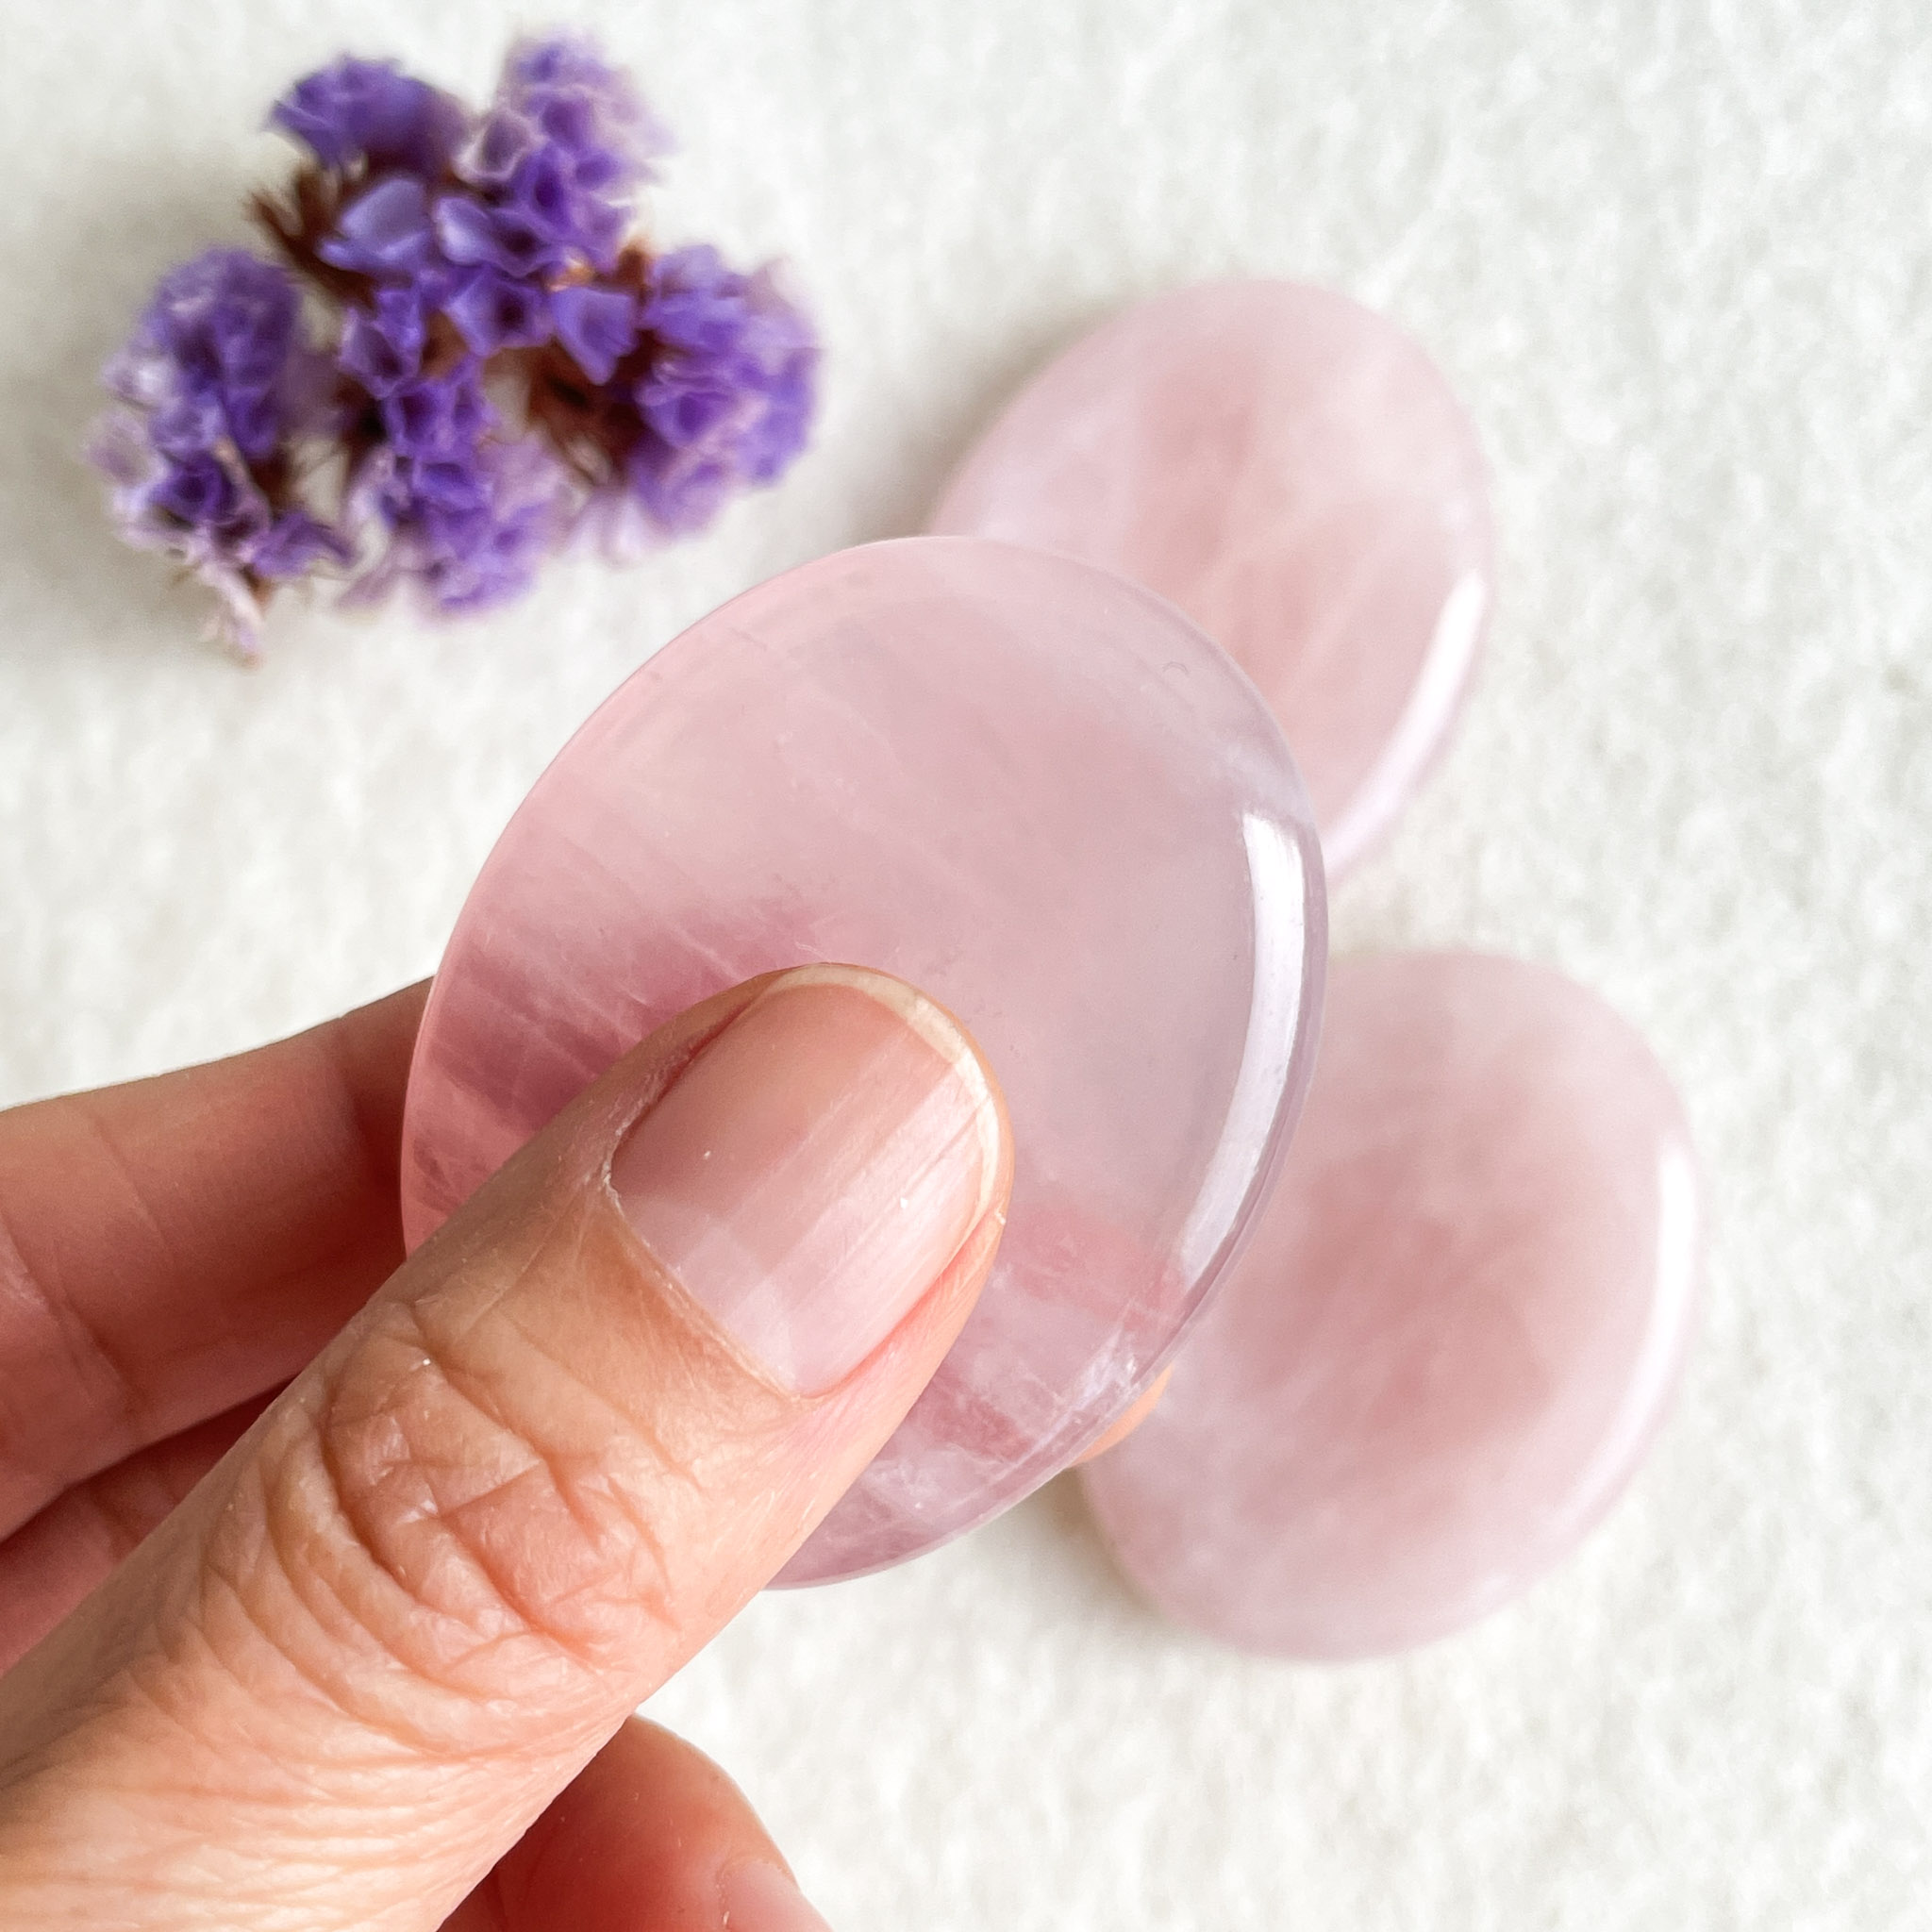 A hand holding a translucent pink crystal with two similar crystals and a bunch of small purple flowers in the background on a white surface.